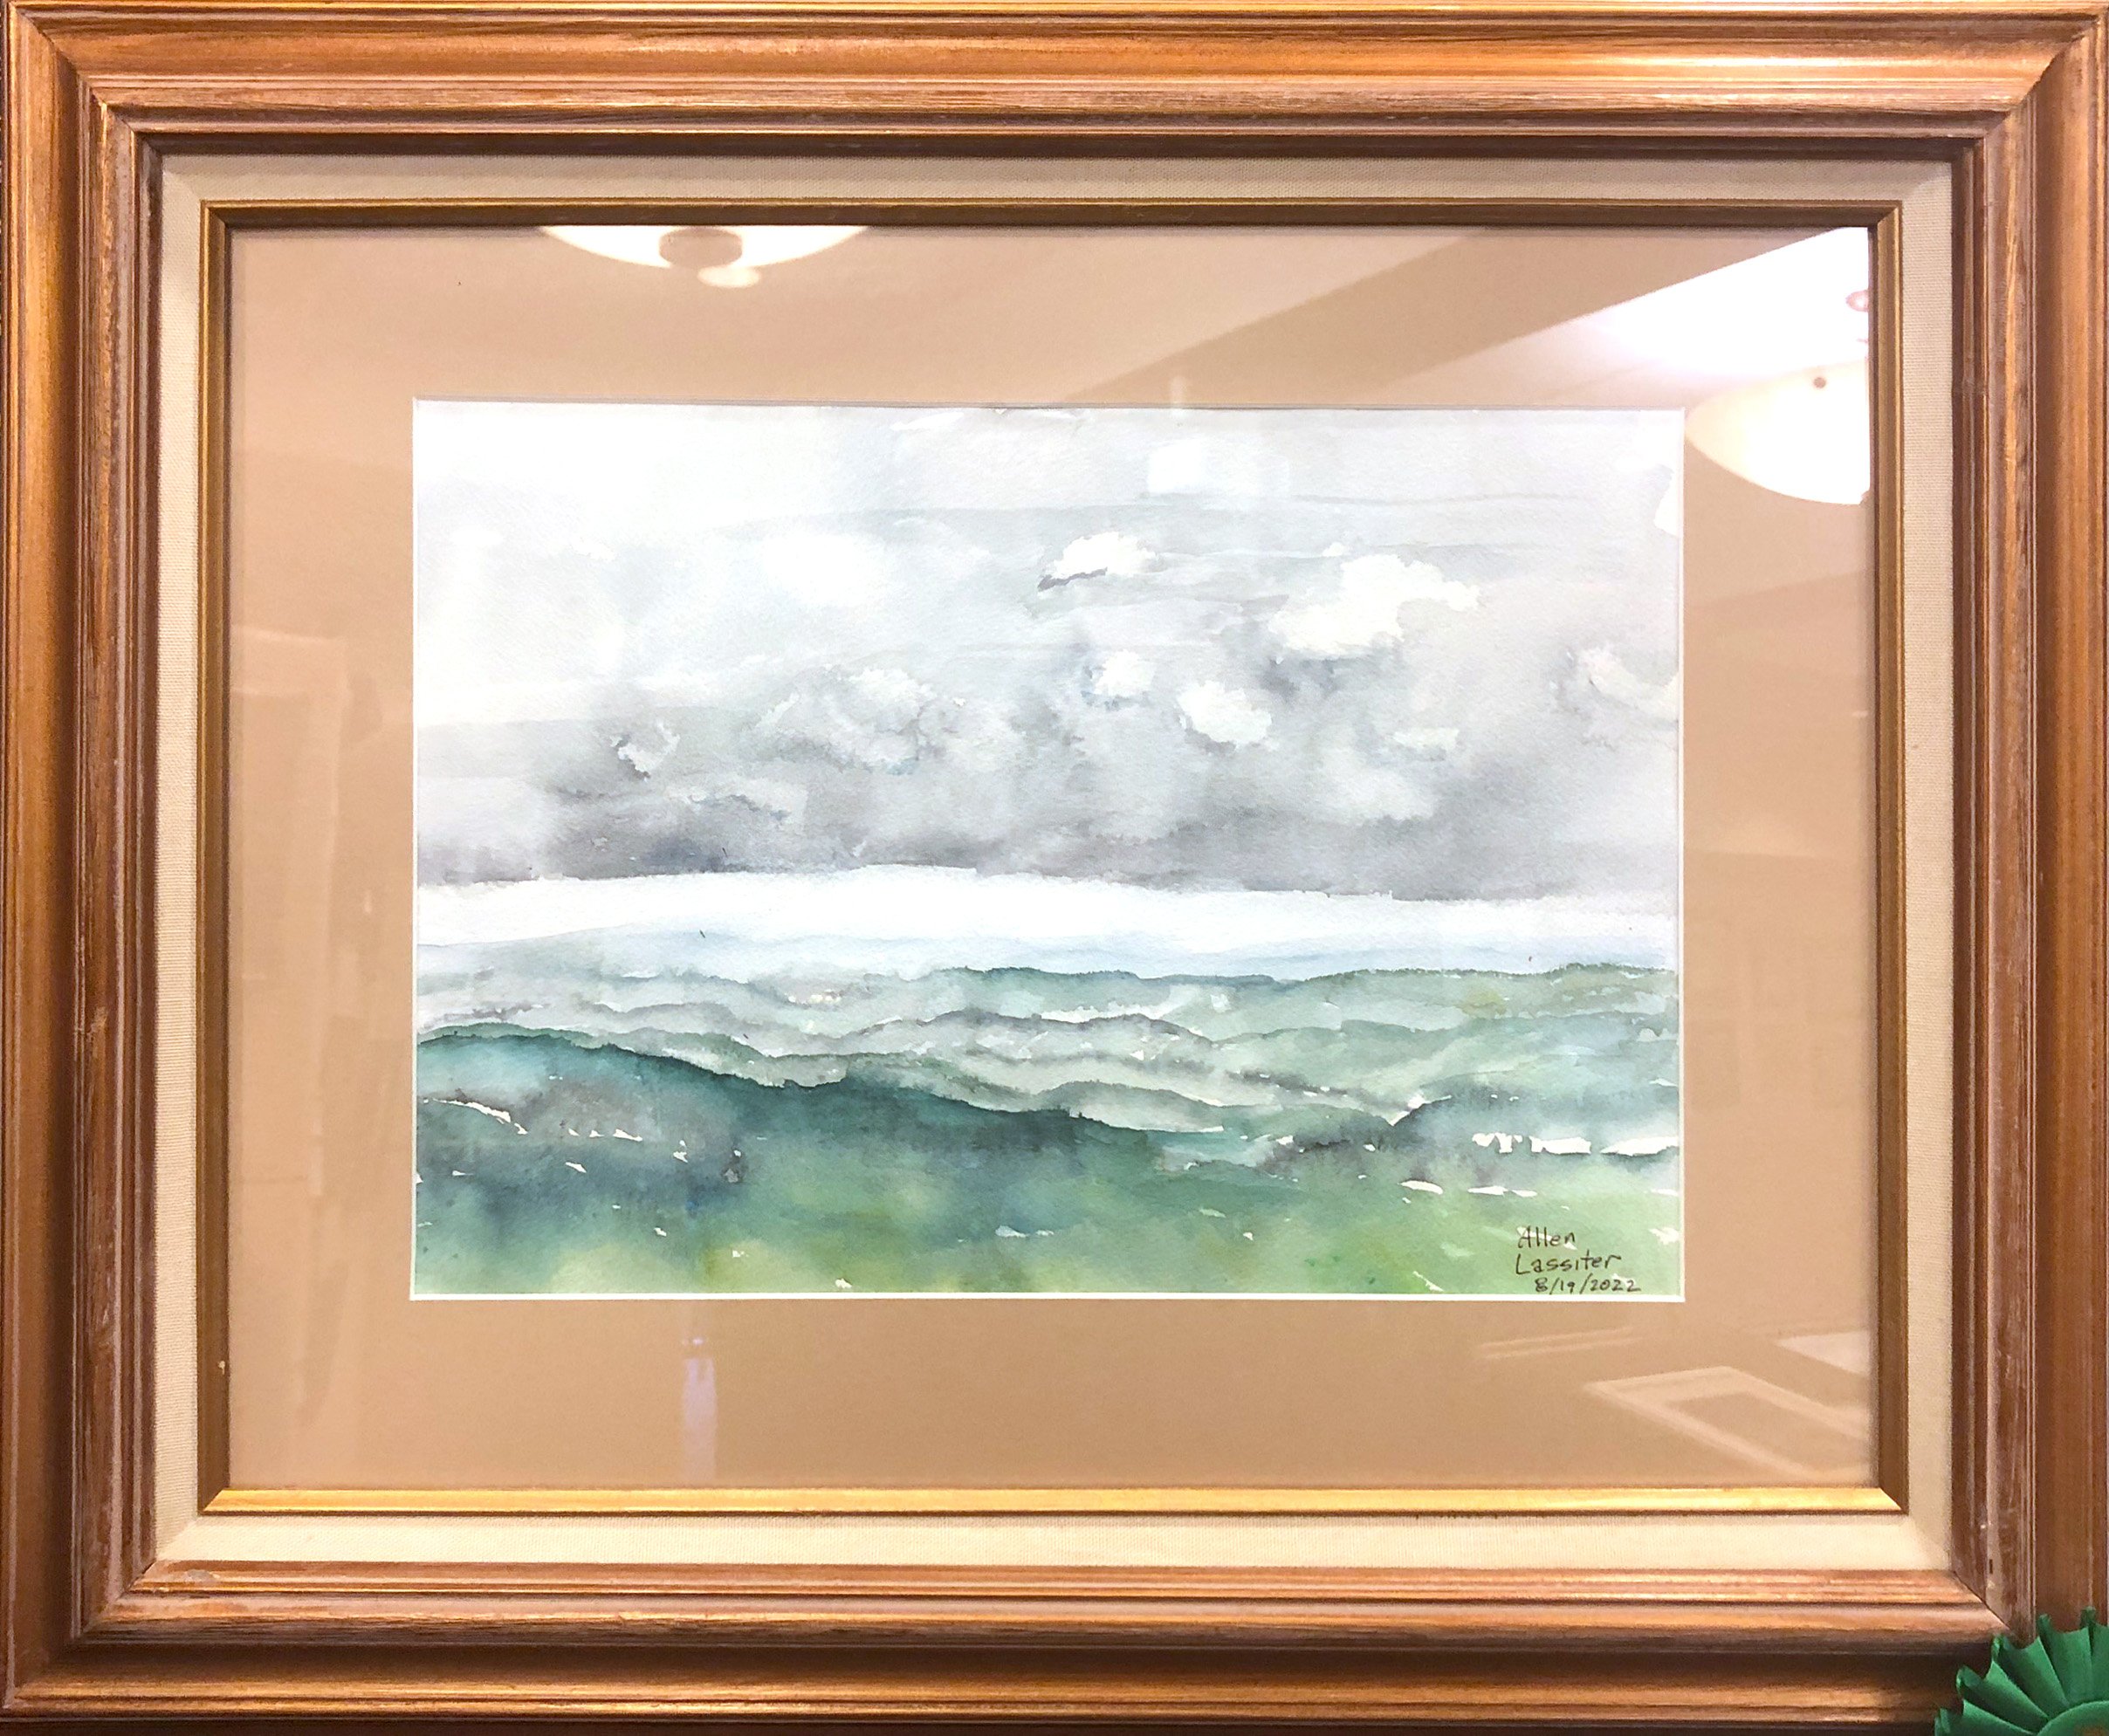 5th: Allen Lassiter, "View from the Blowing Rock - Large". Watercolor.